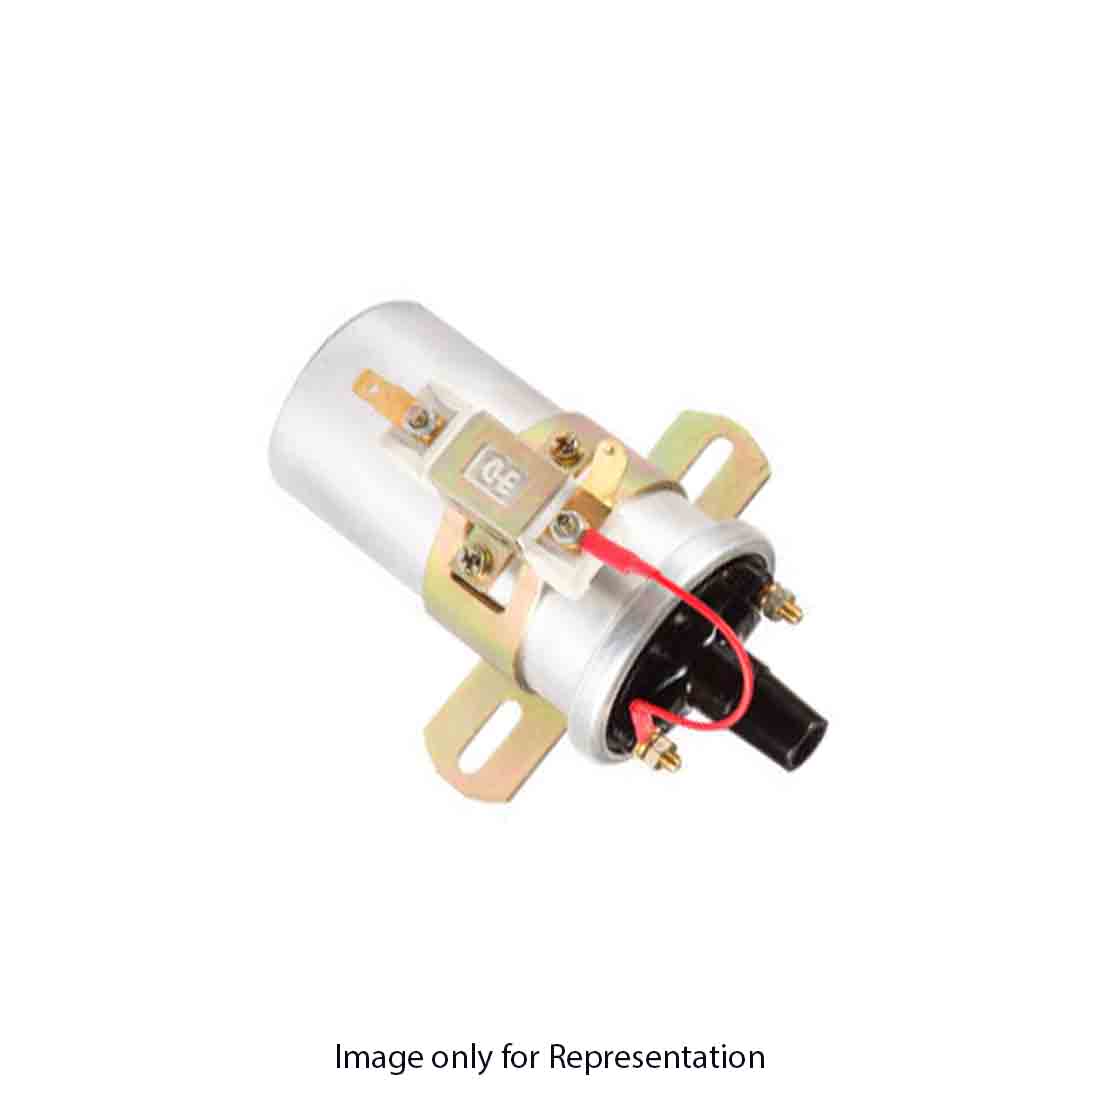 Renault, Nissan, Mitsubishi- Ignition Coil, COIL ASSY IGN 224481HC2B For Nissan Sunny